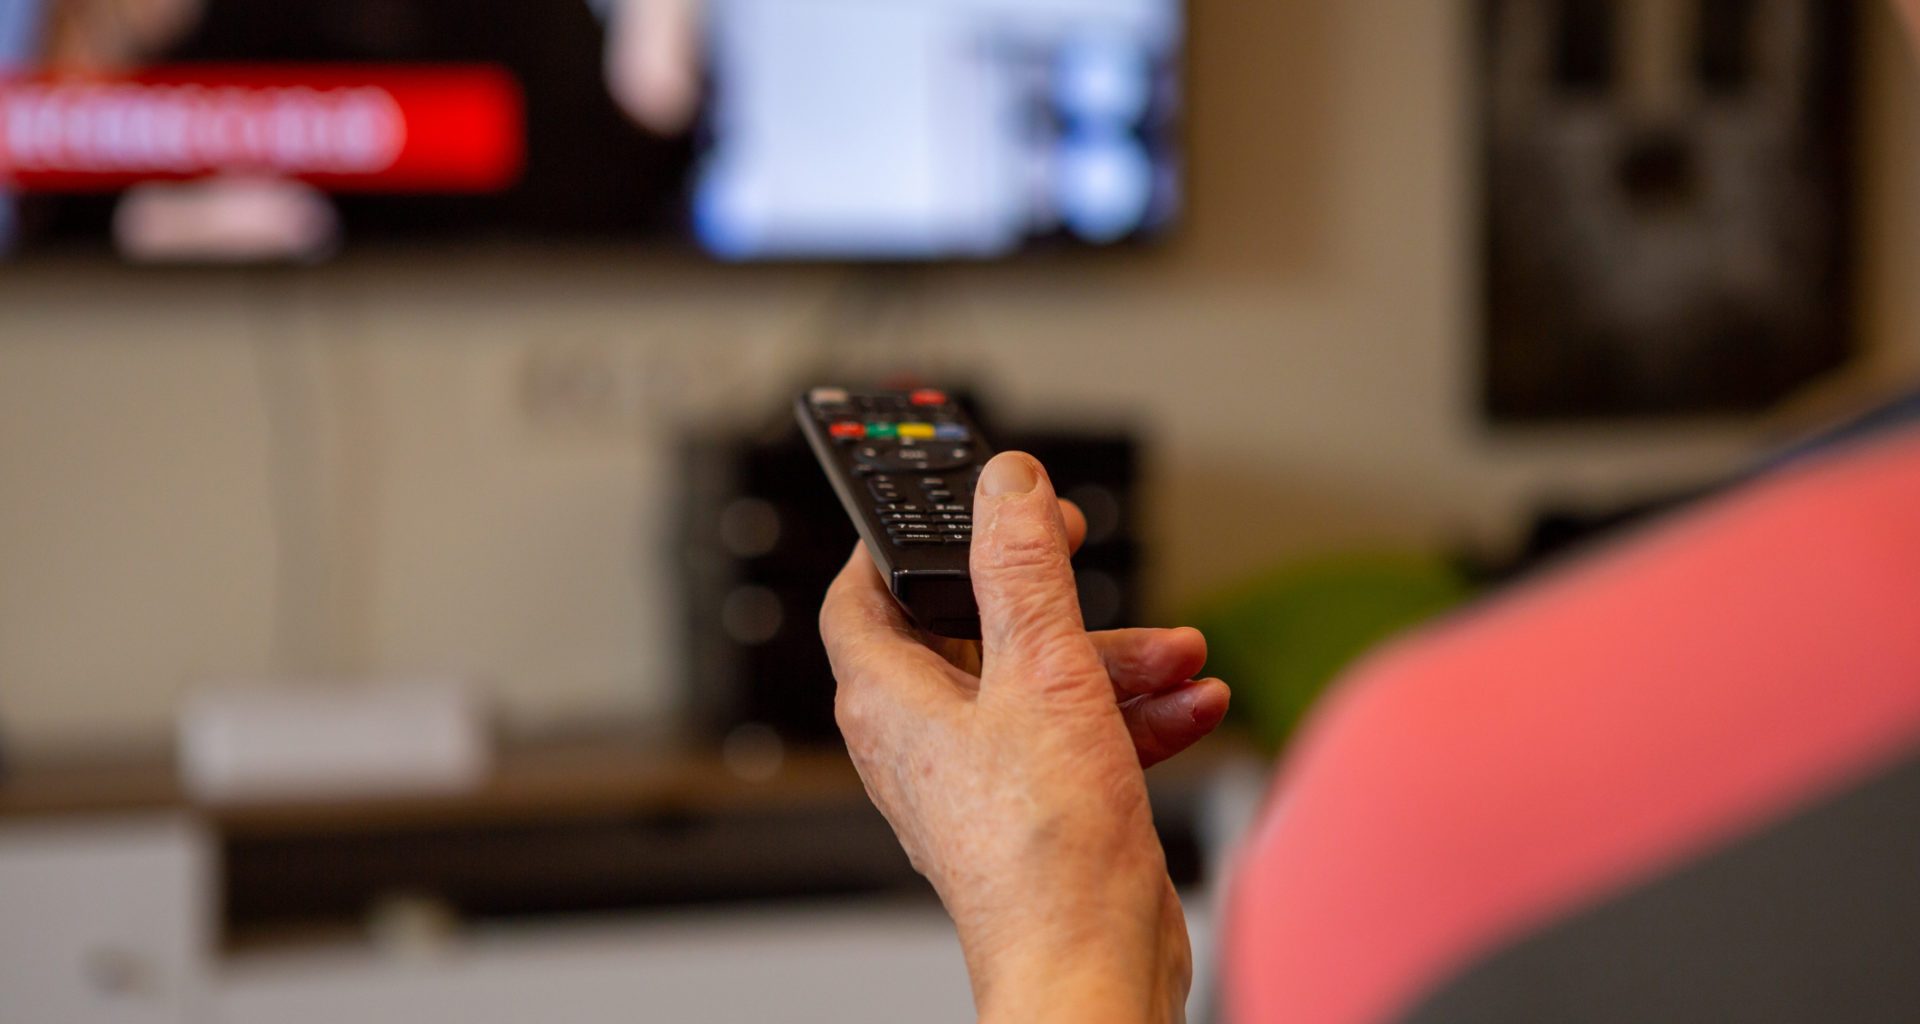 Claim Scotland has "lowest amount" of TV licence payment is Unsupported 4